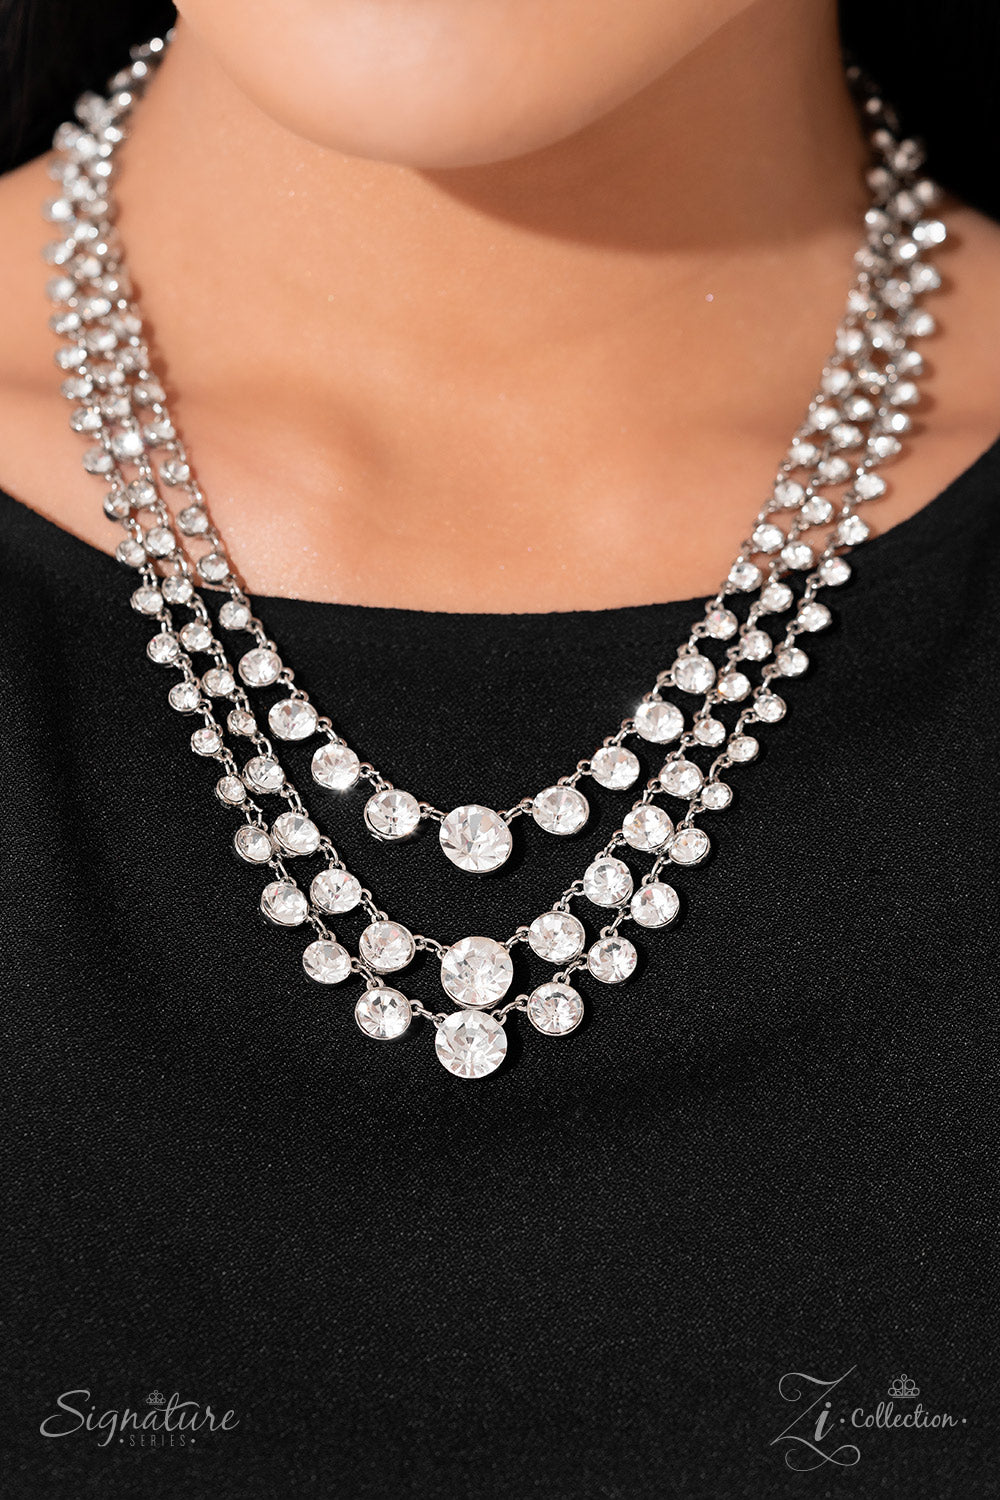 Paparazzi Accessories The Dana Rows of glittery, white rhinestones drape between two sleek silver bars, falling into three luxurious layers. The sparkling gems gradually increase in size as they fall towards the center of the design, adding dazzling dimen